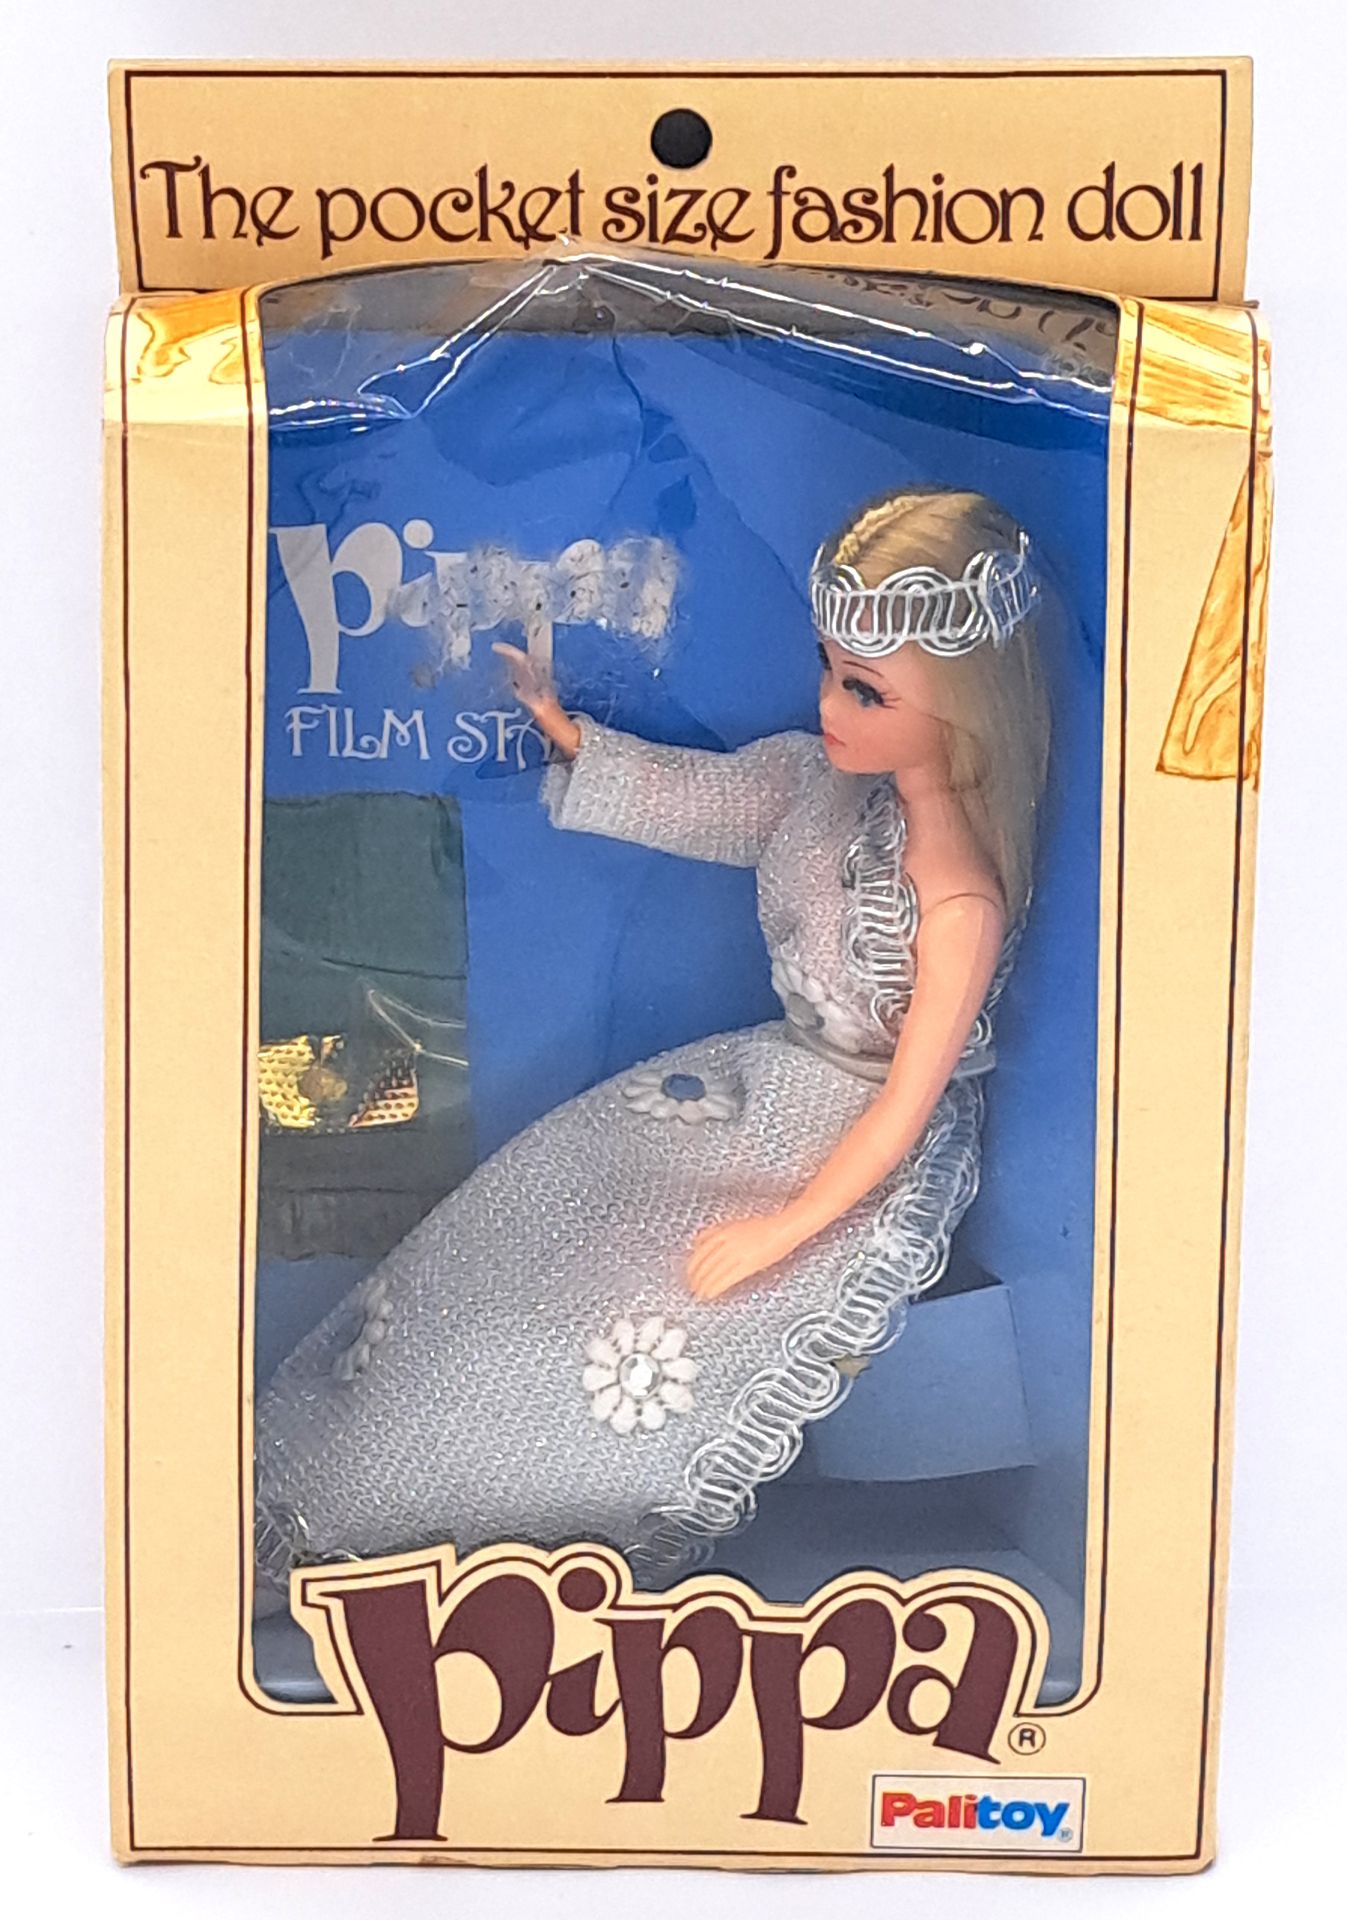 Palitoy Pippa Film Star vintage boxed doll - Image 3 of 3